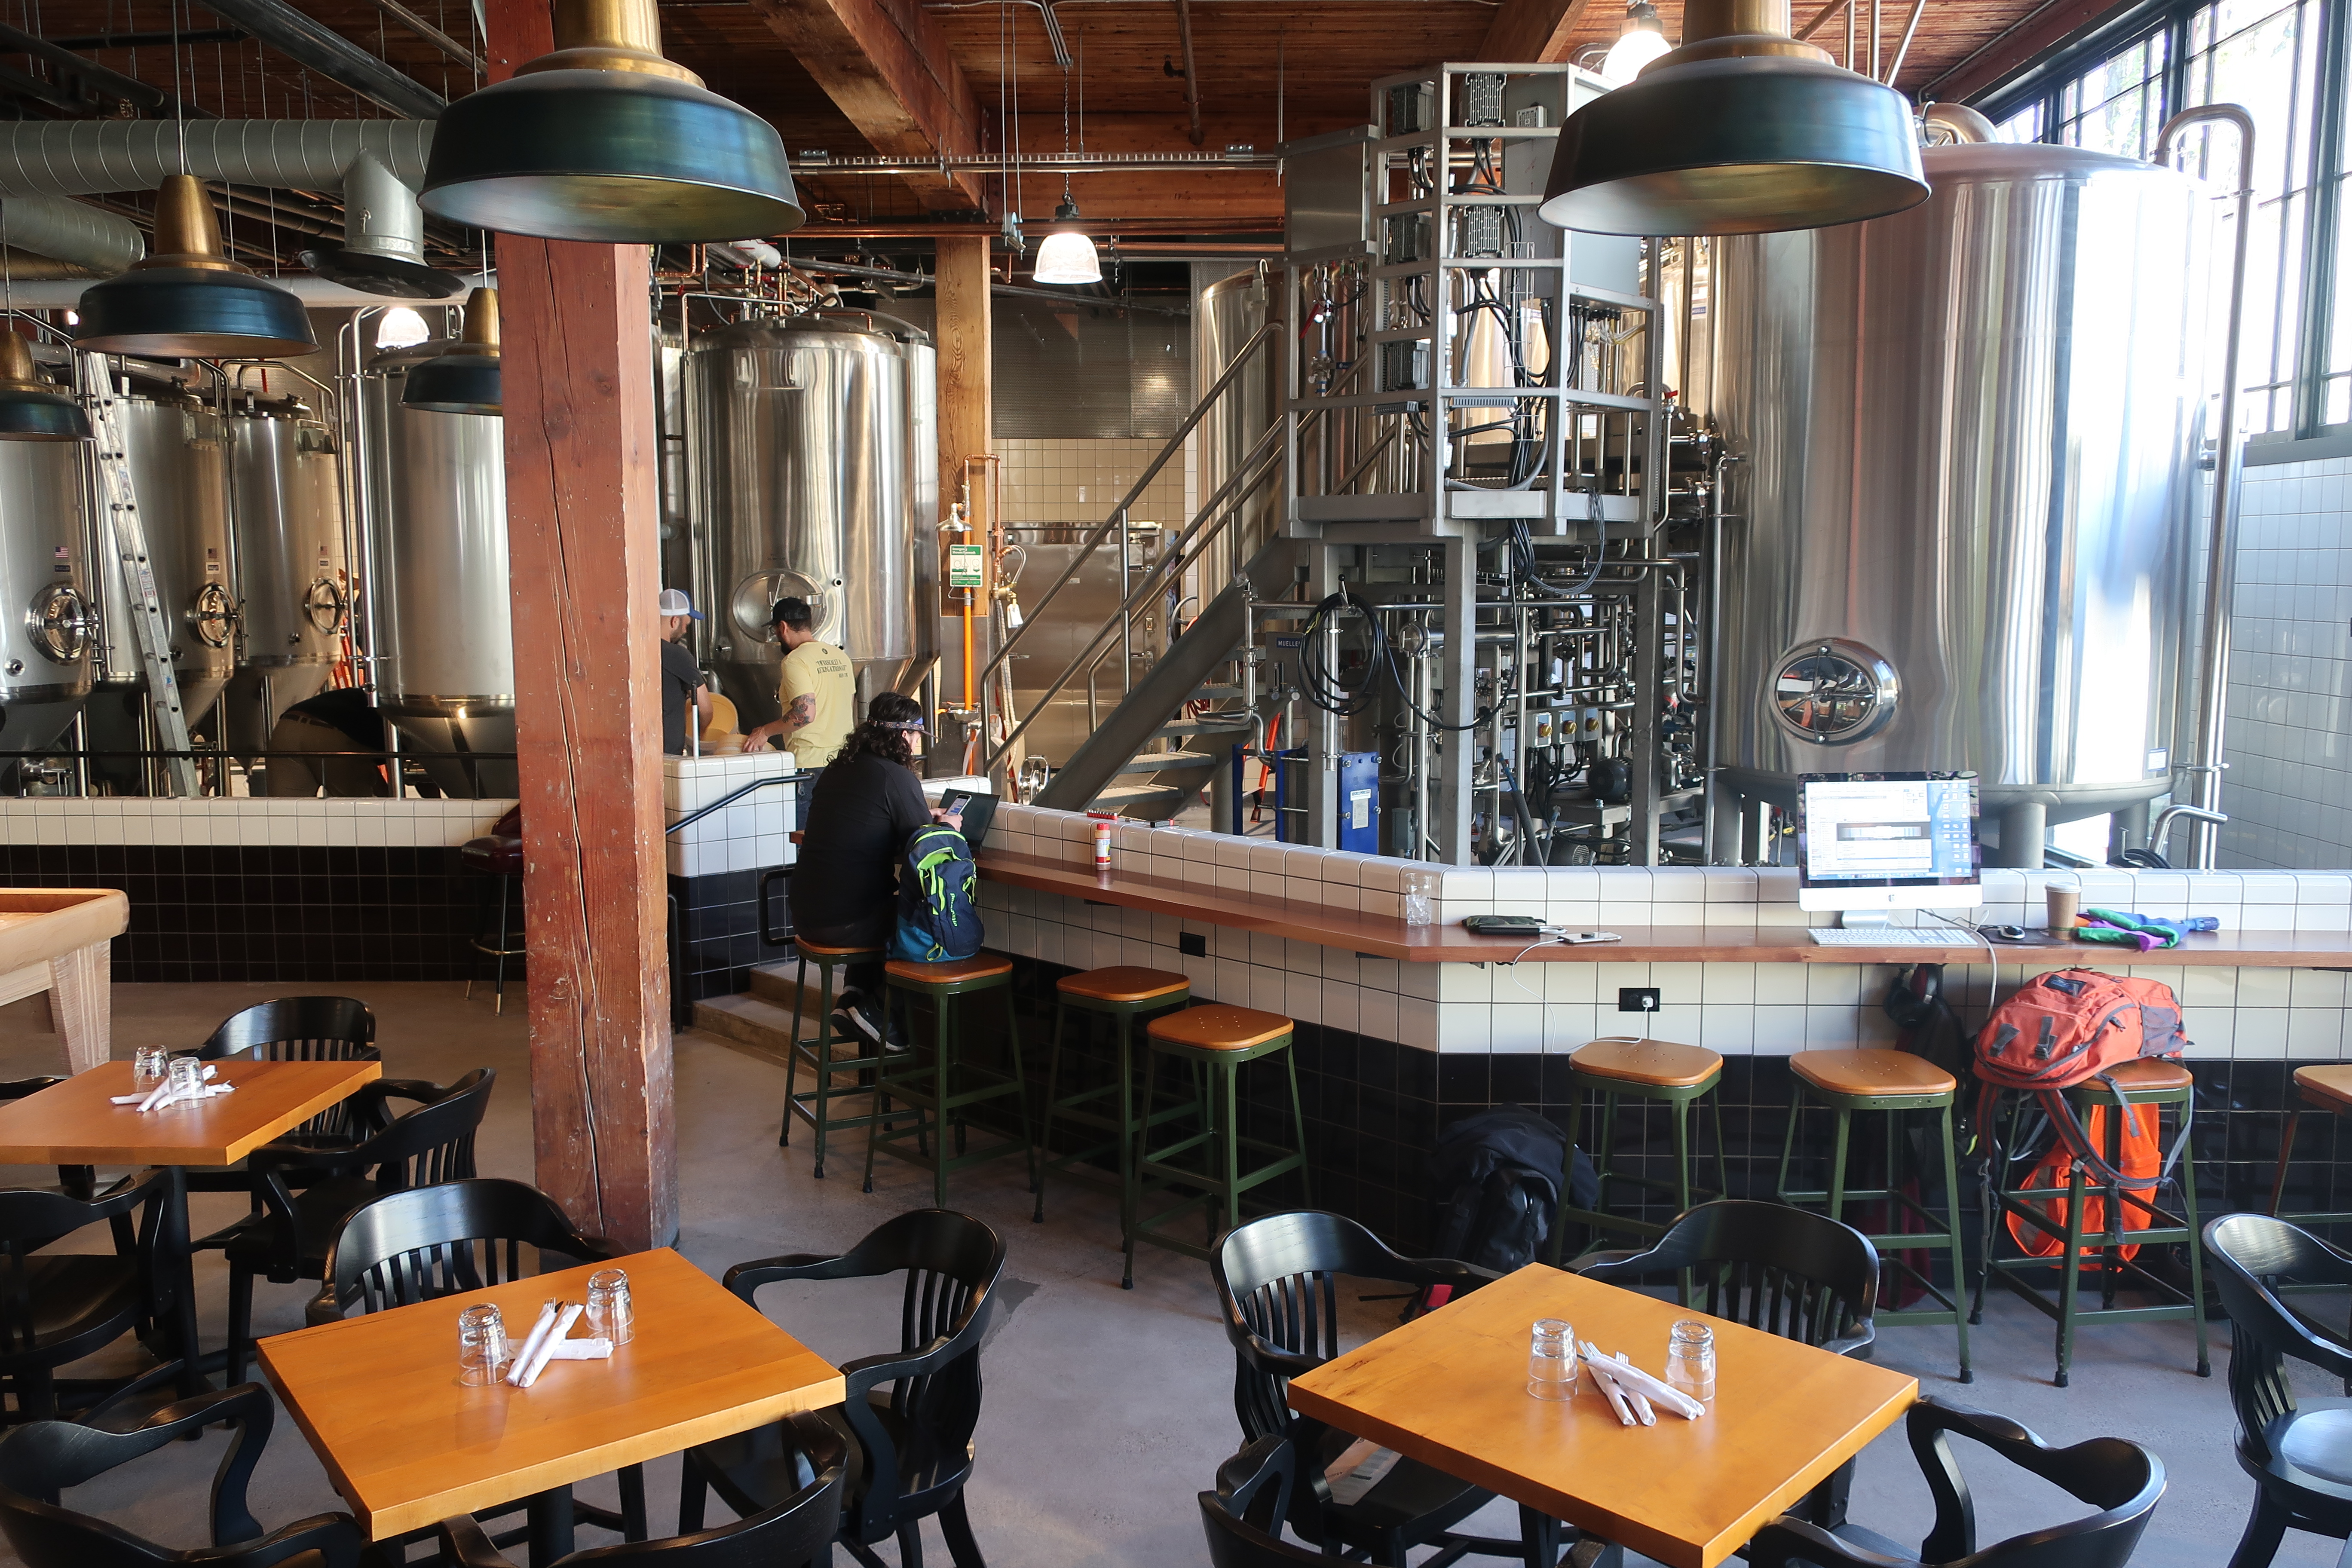 Overlooking the brewhouse and lower dining area at Elysian Brewing - Capitol Hill.